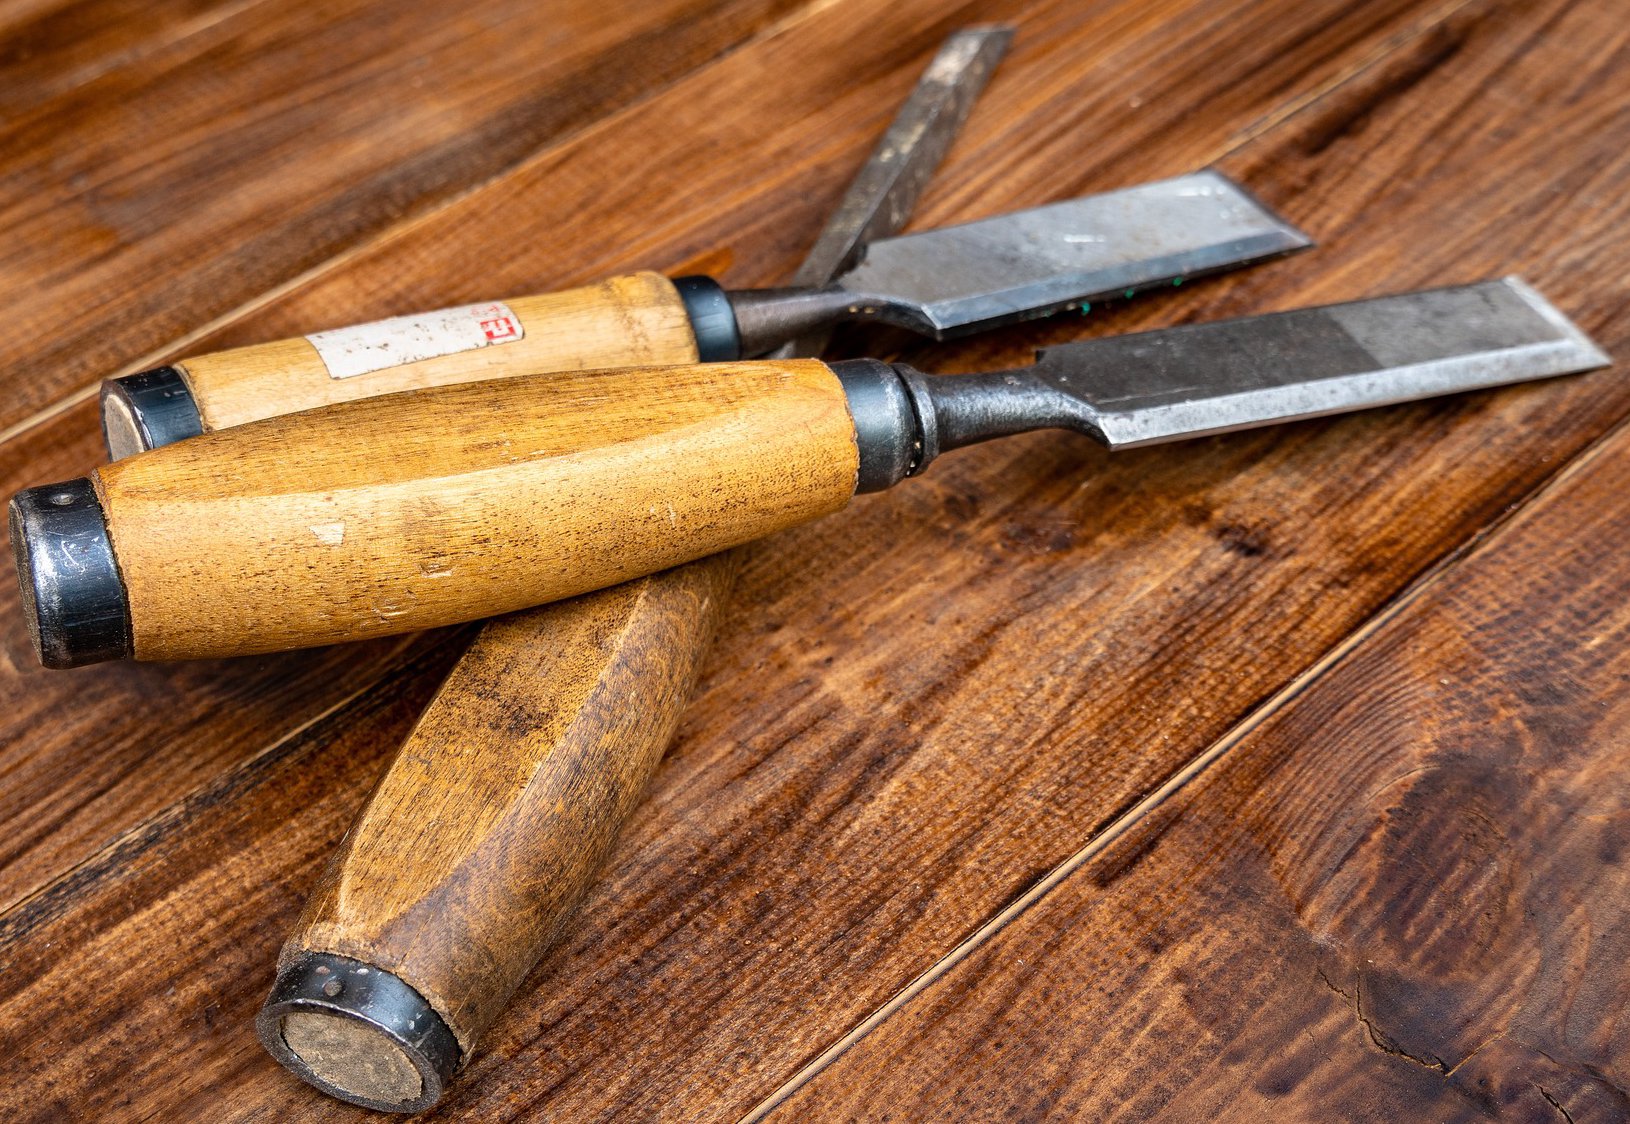 8 Tips for Sharpening Your Woodworking Tools